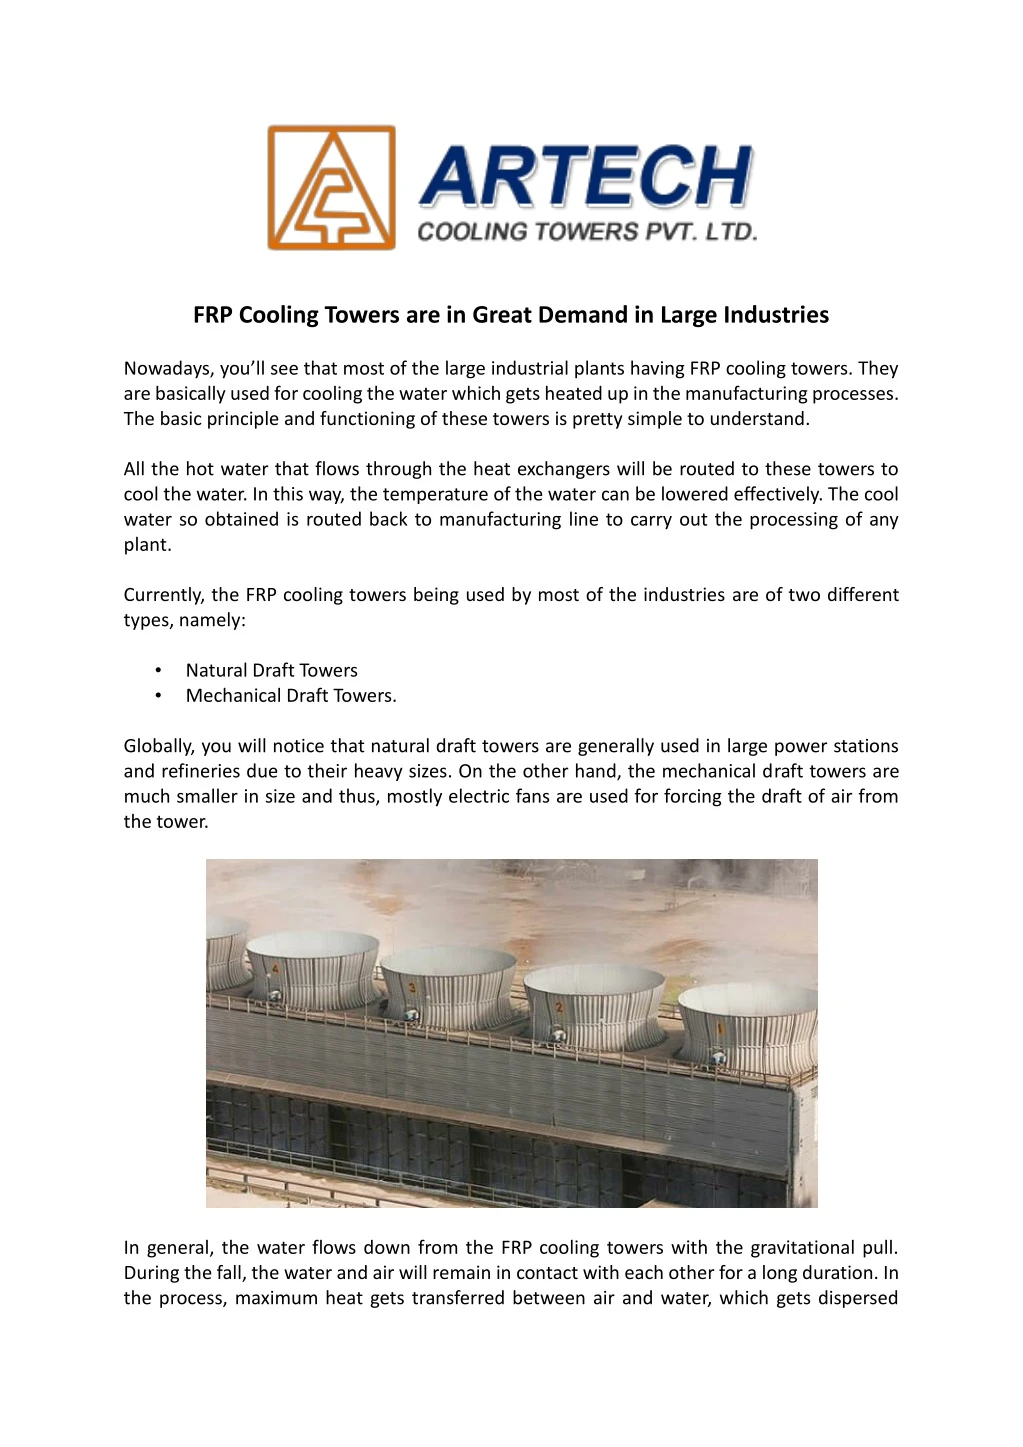 frp cooling towers are in great demand in large